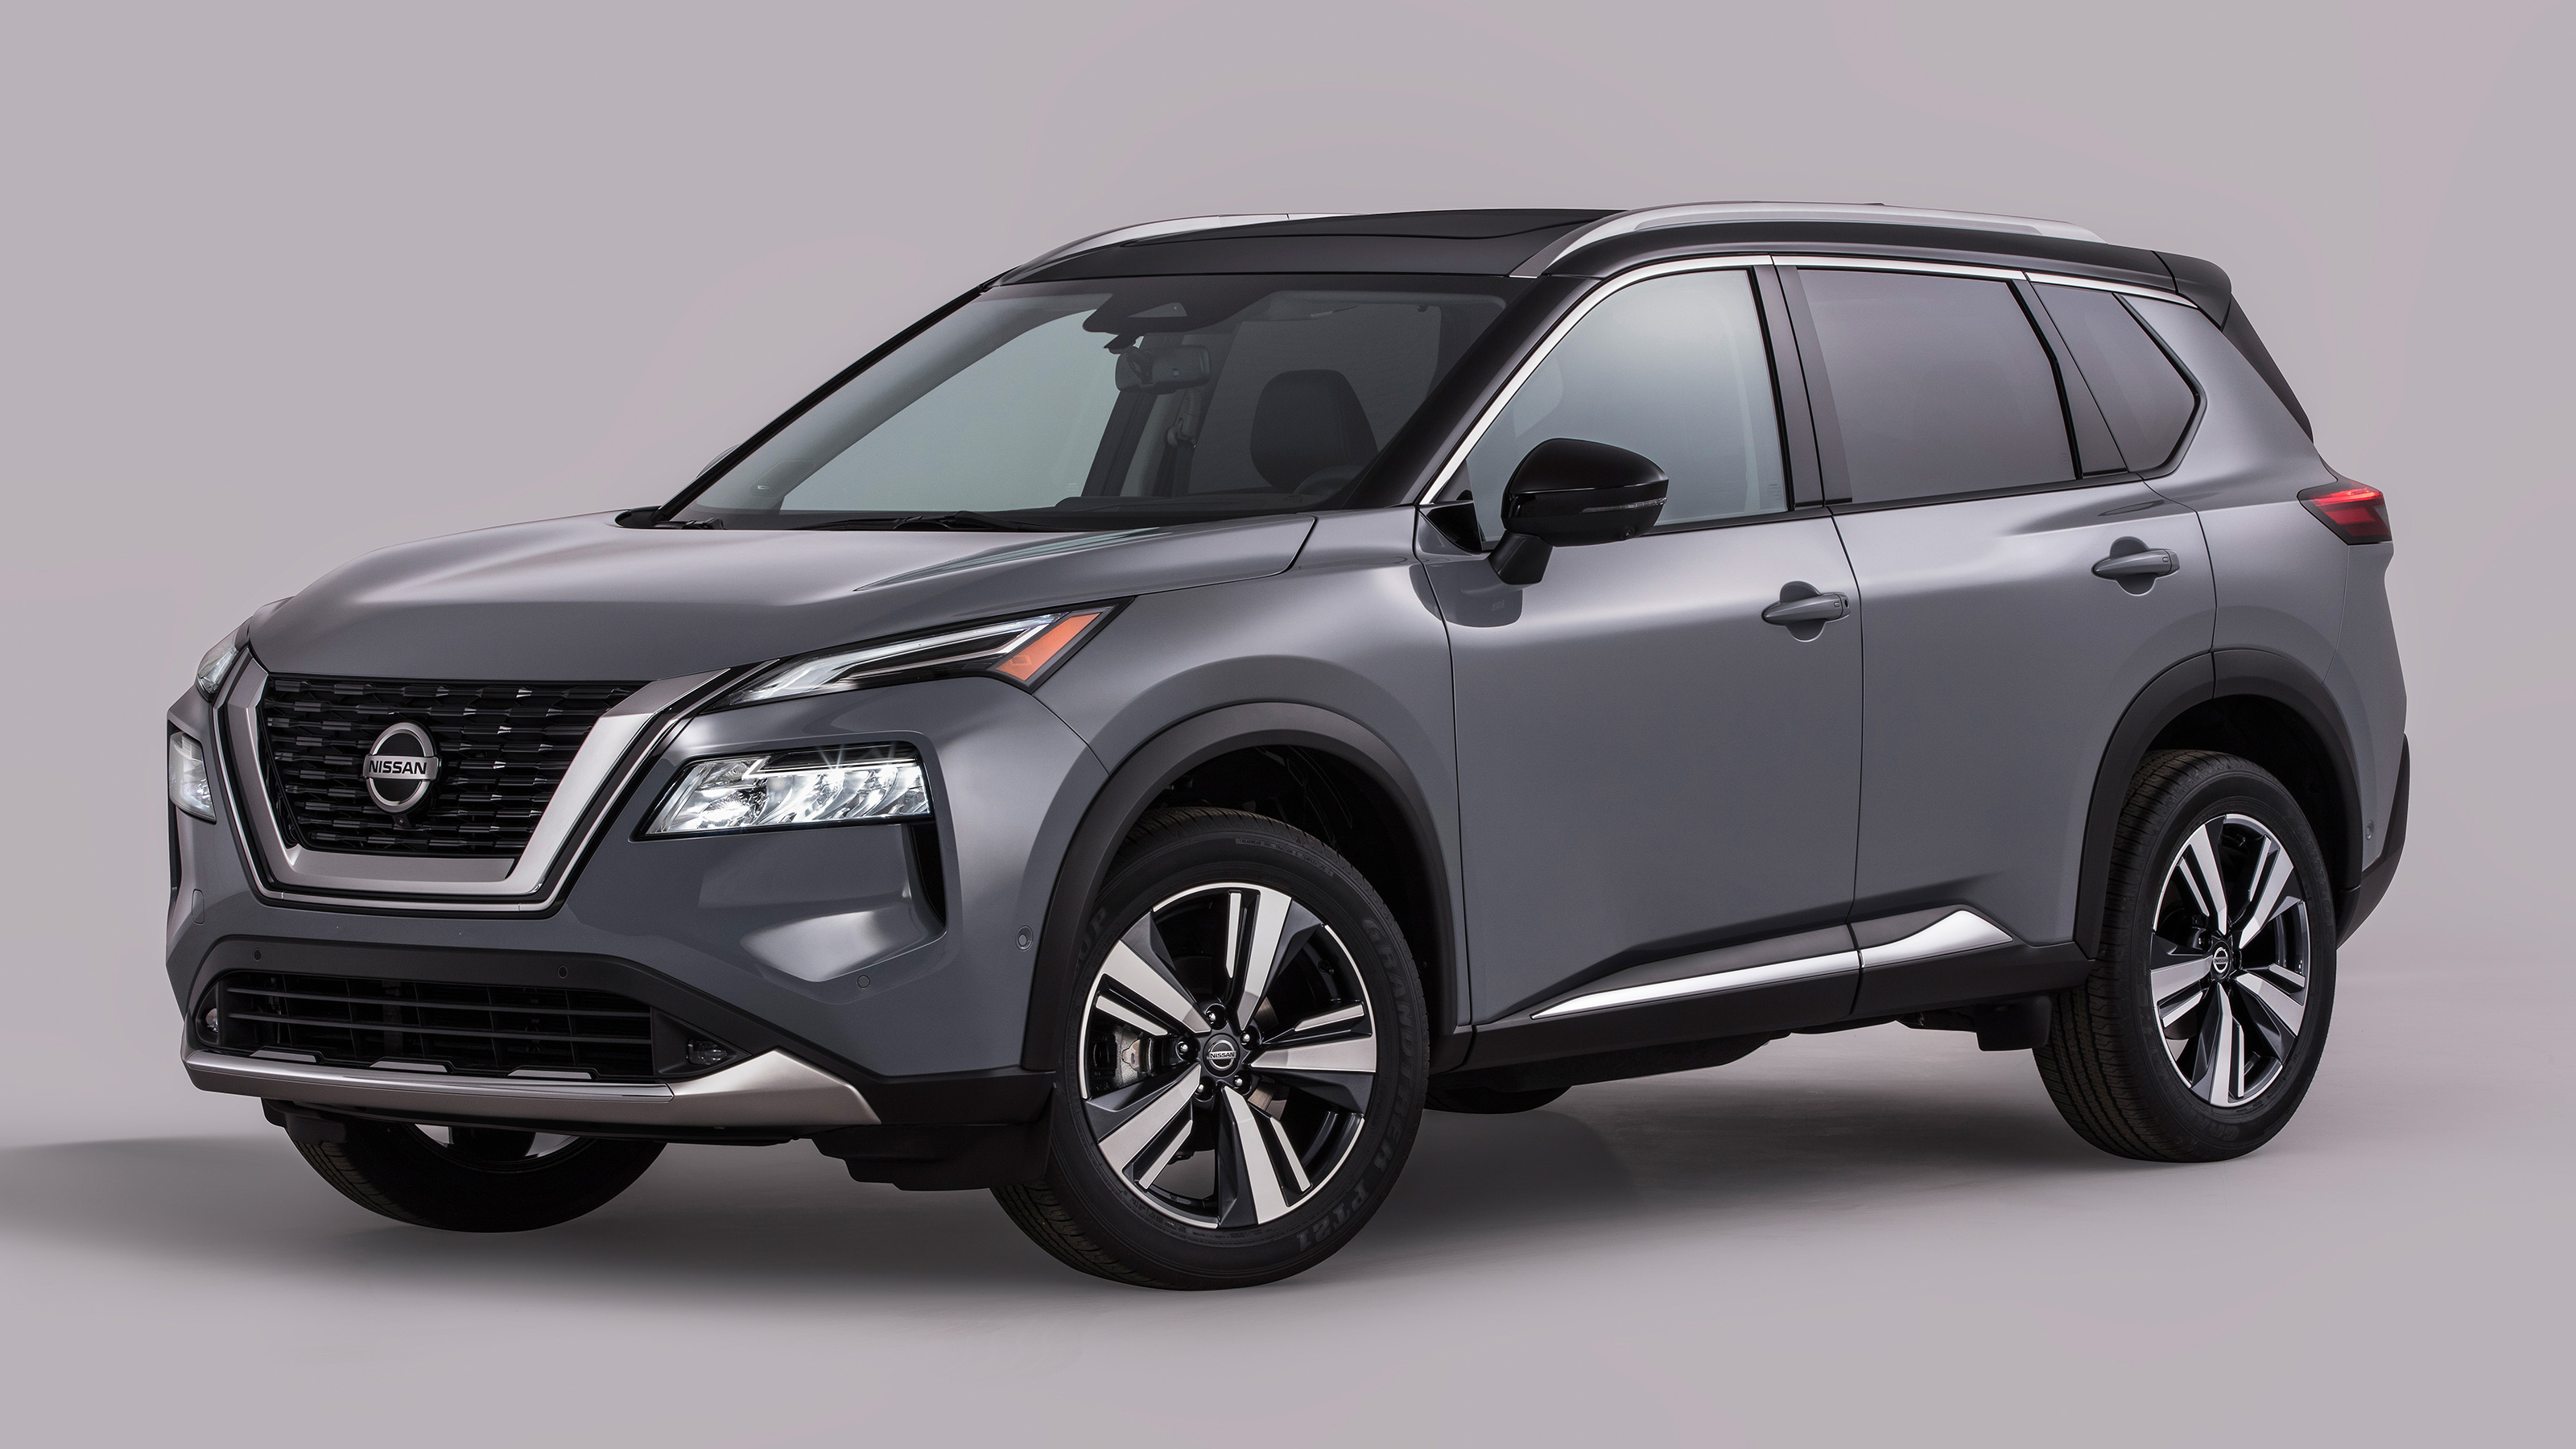 New 2021 Nissan X Trail Revealed In Us Only Nissan Rogue Form Auto Express One big criticism of the current car is its mediocre interior. new 2021 nissan x trail revealed in us